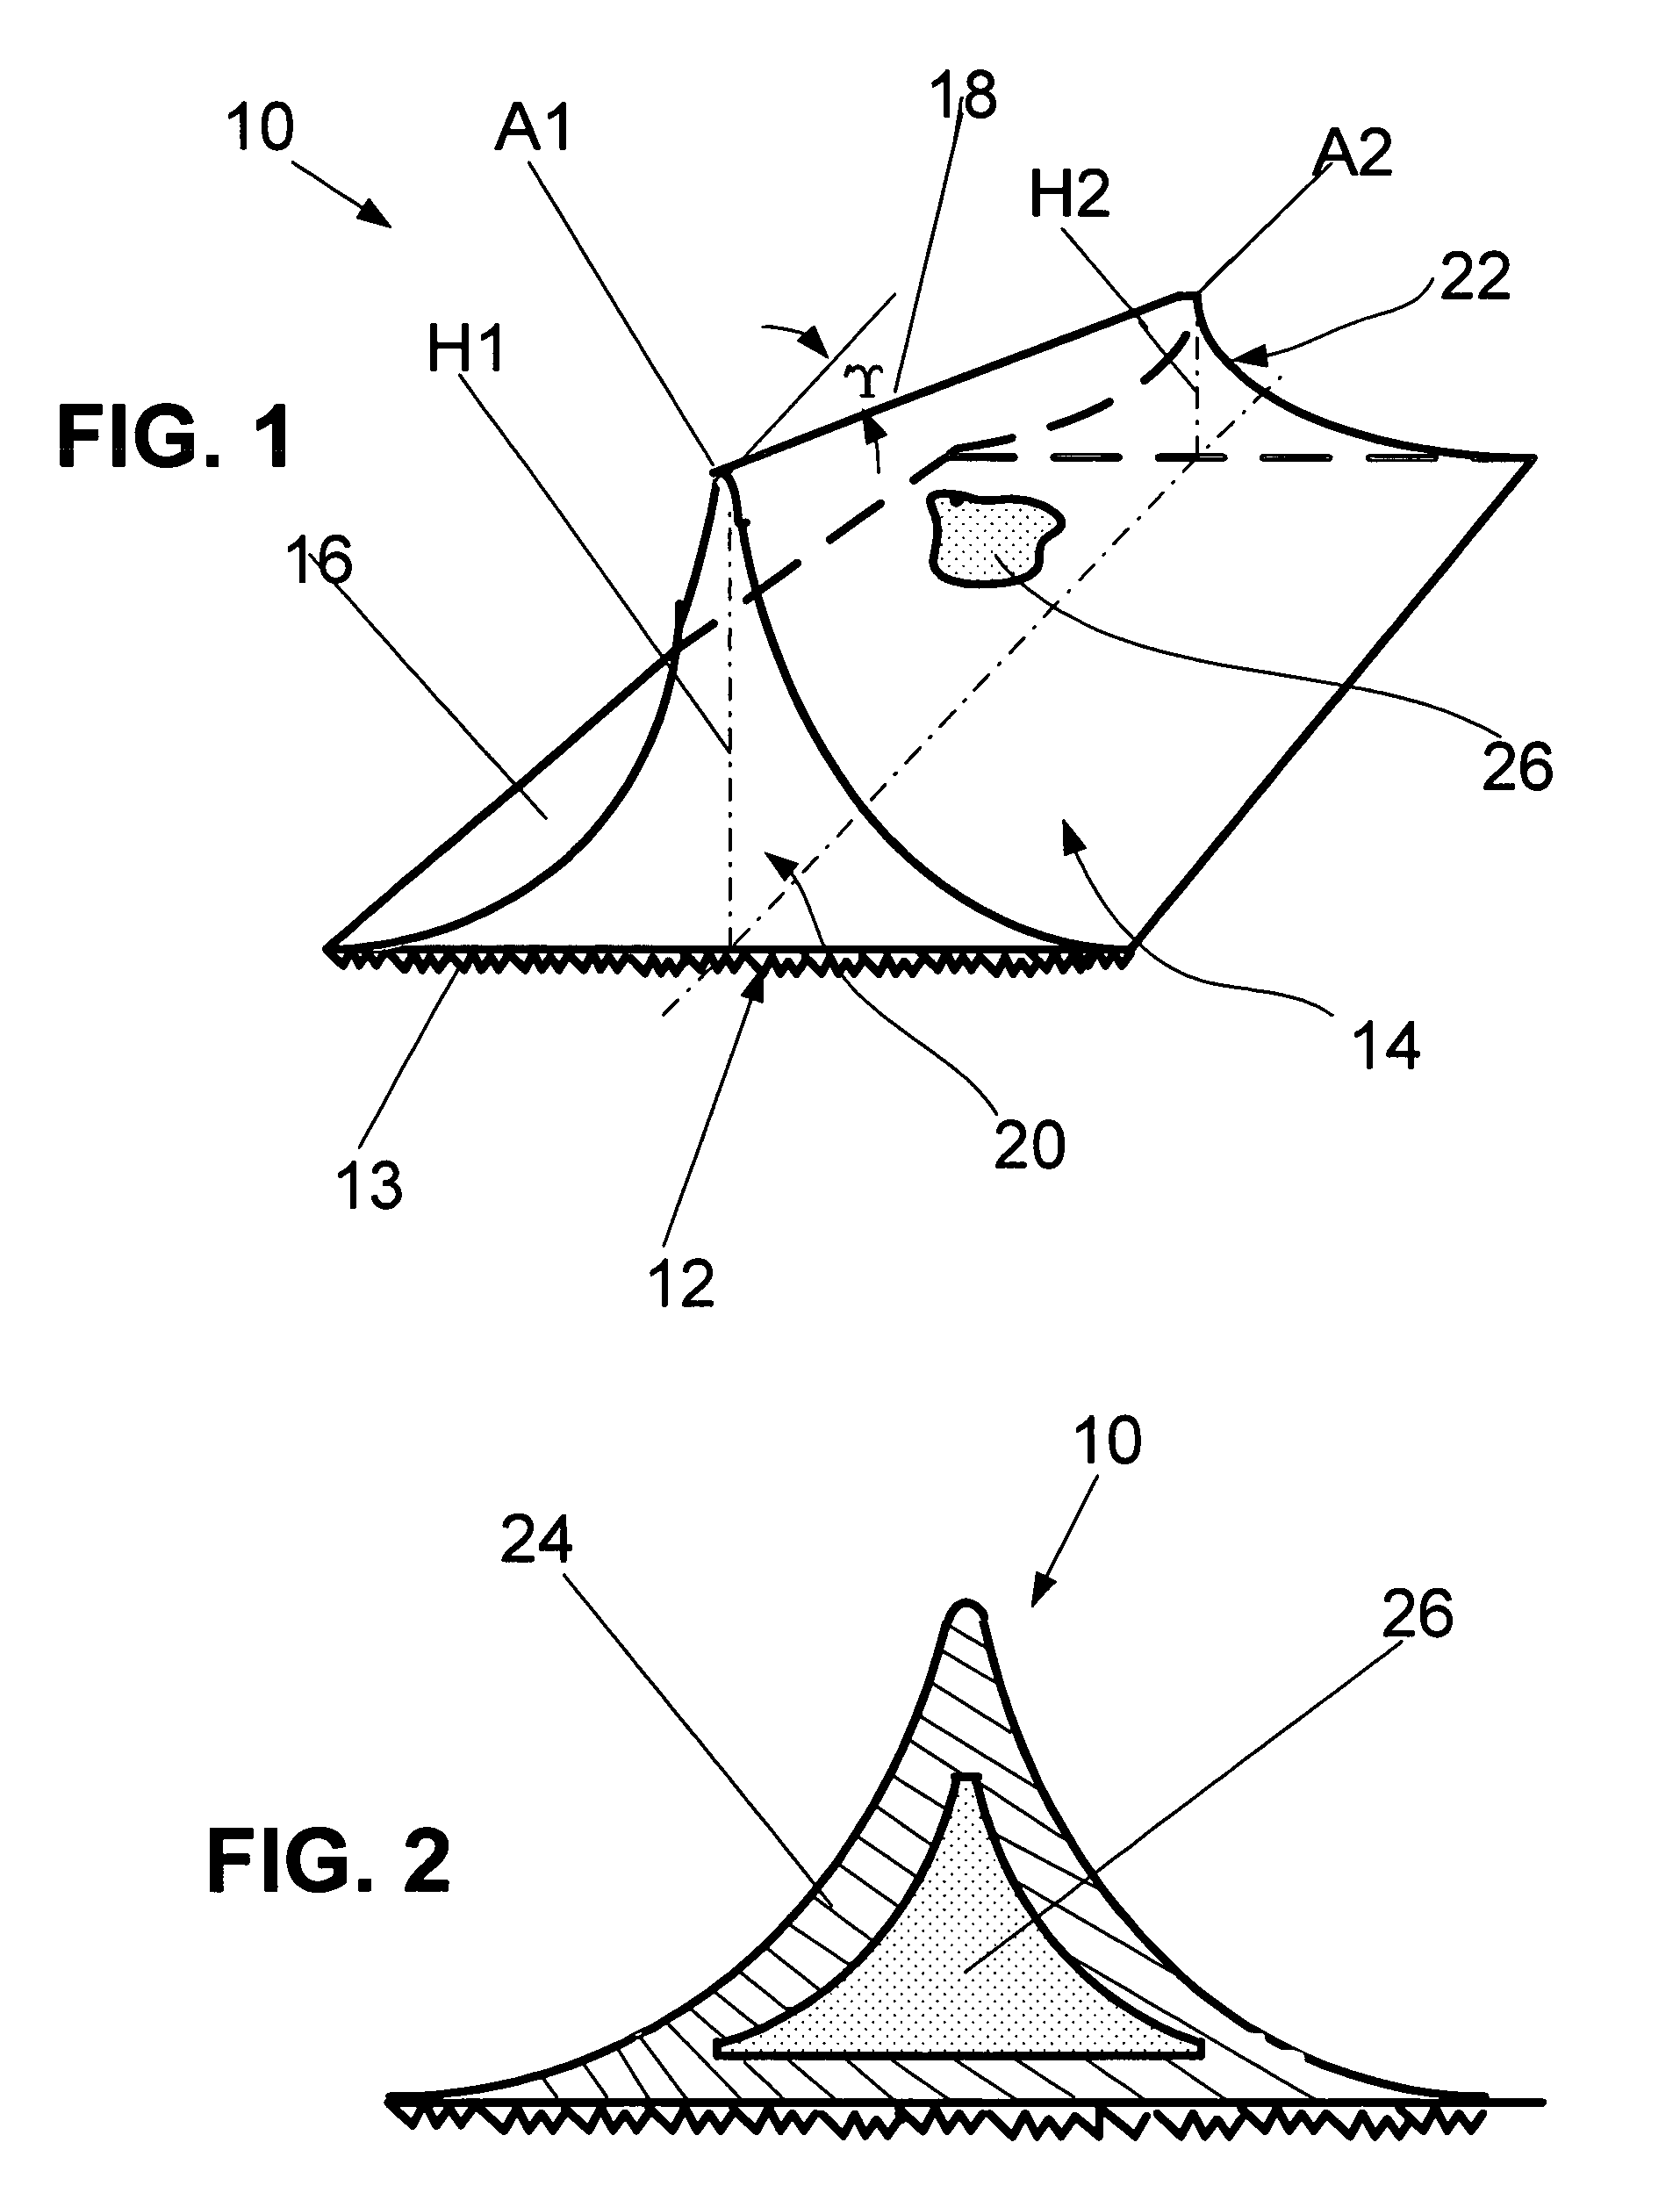 Ergonomic thigh support and method of uniformly distributing pressure on the thigh surface of a seated person